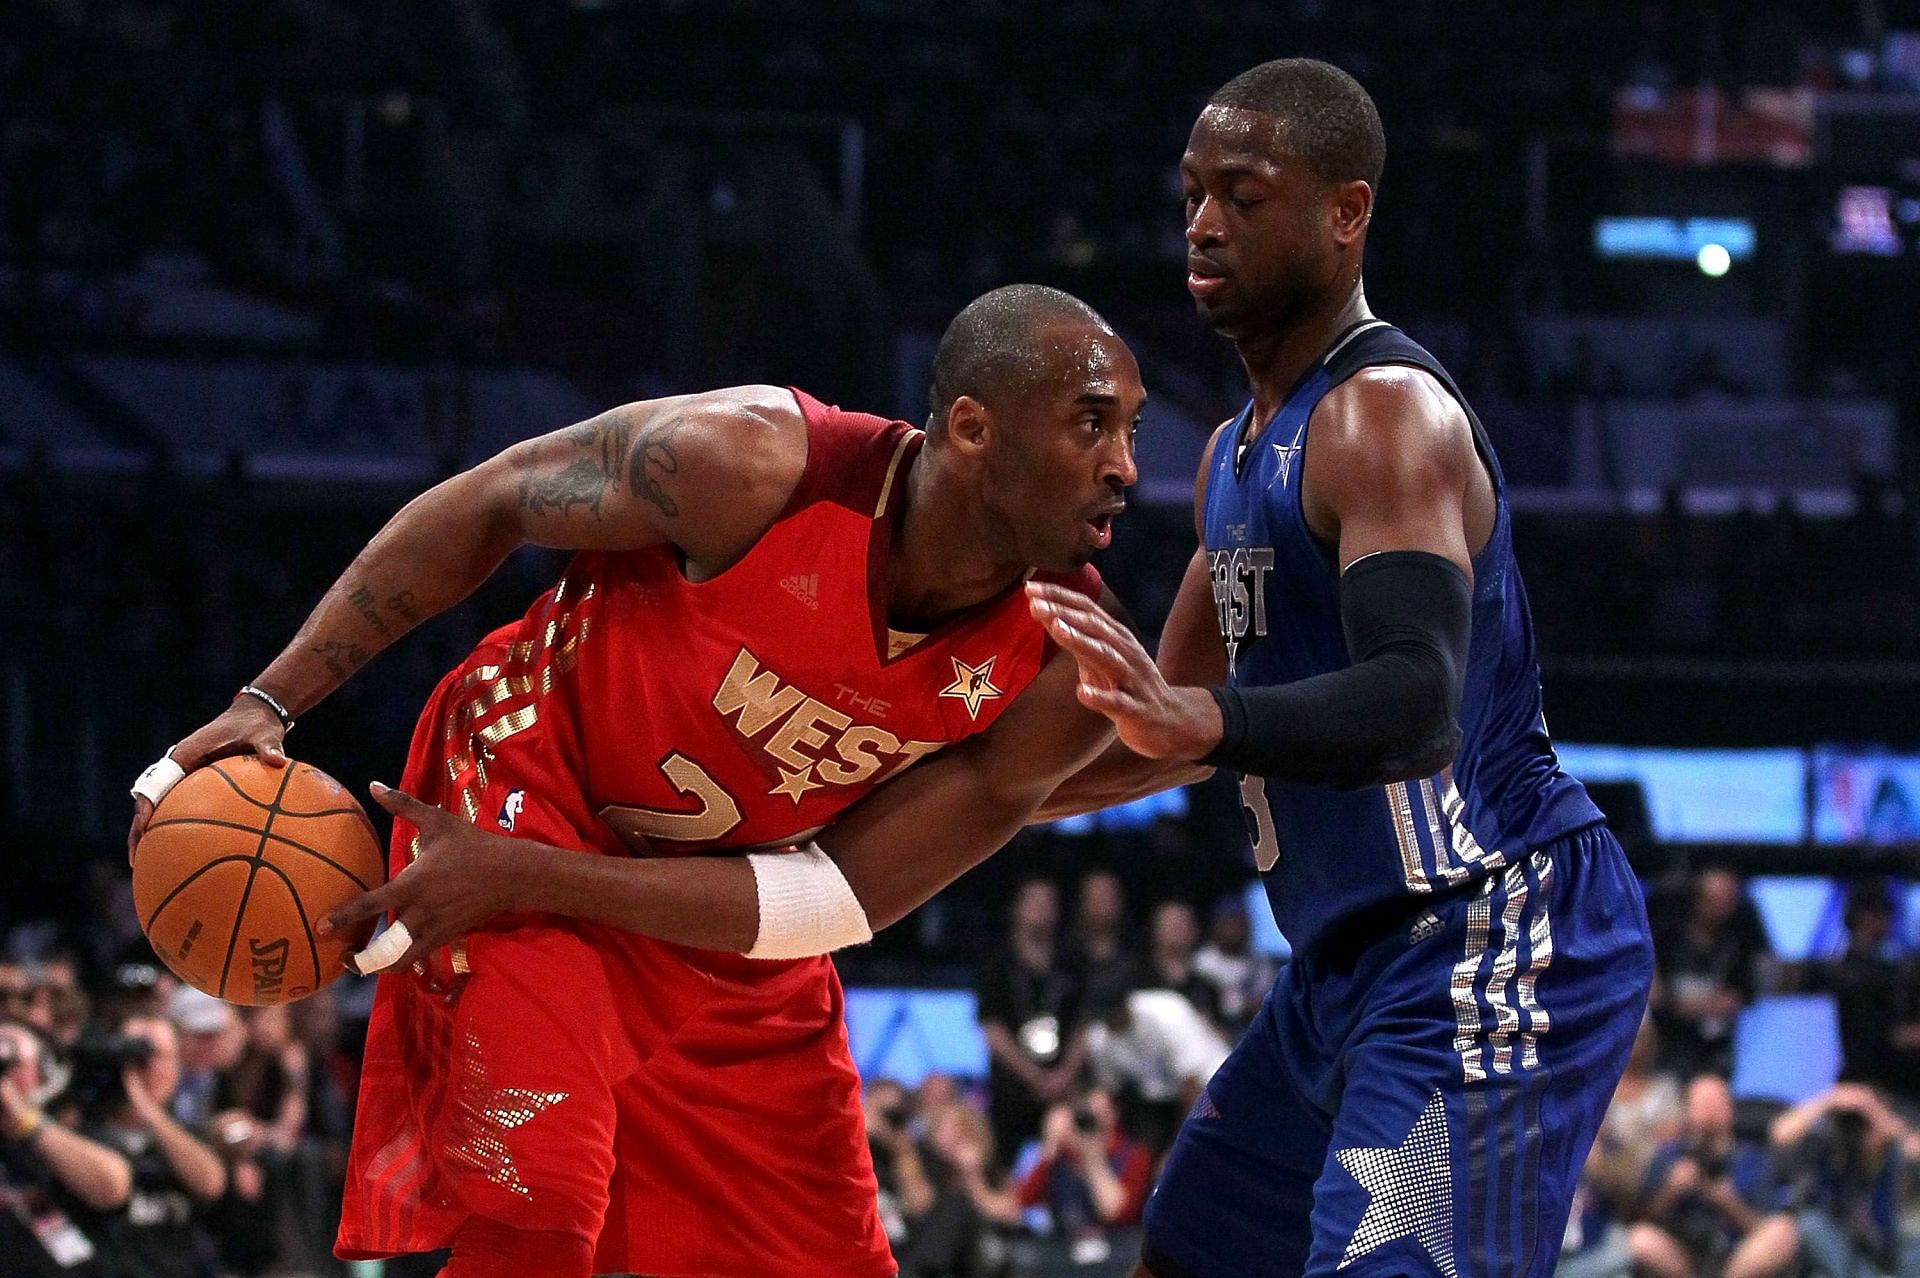 Kobe Bryant being guarded by Dwyane Wade